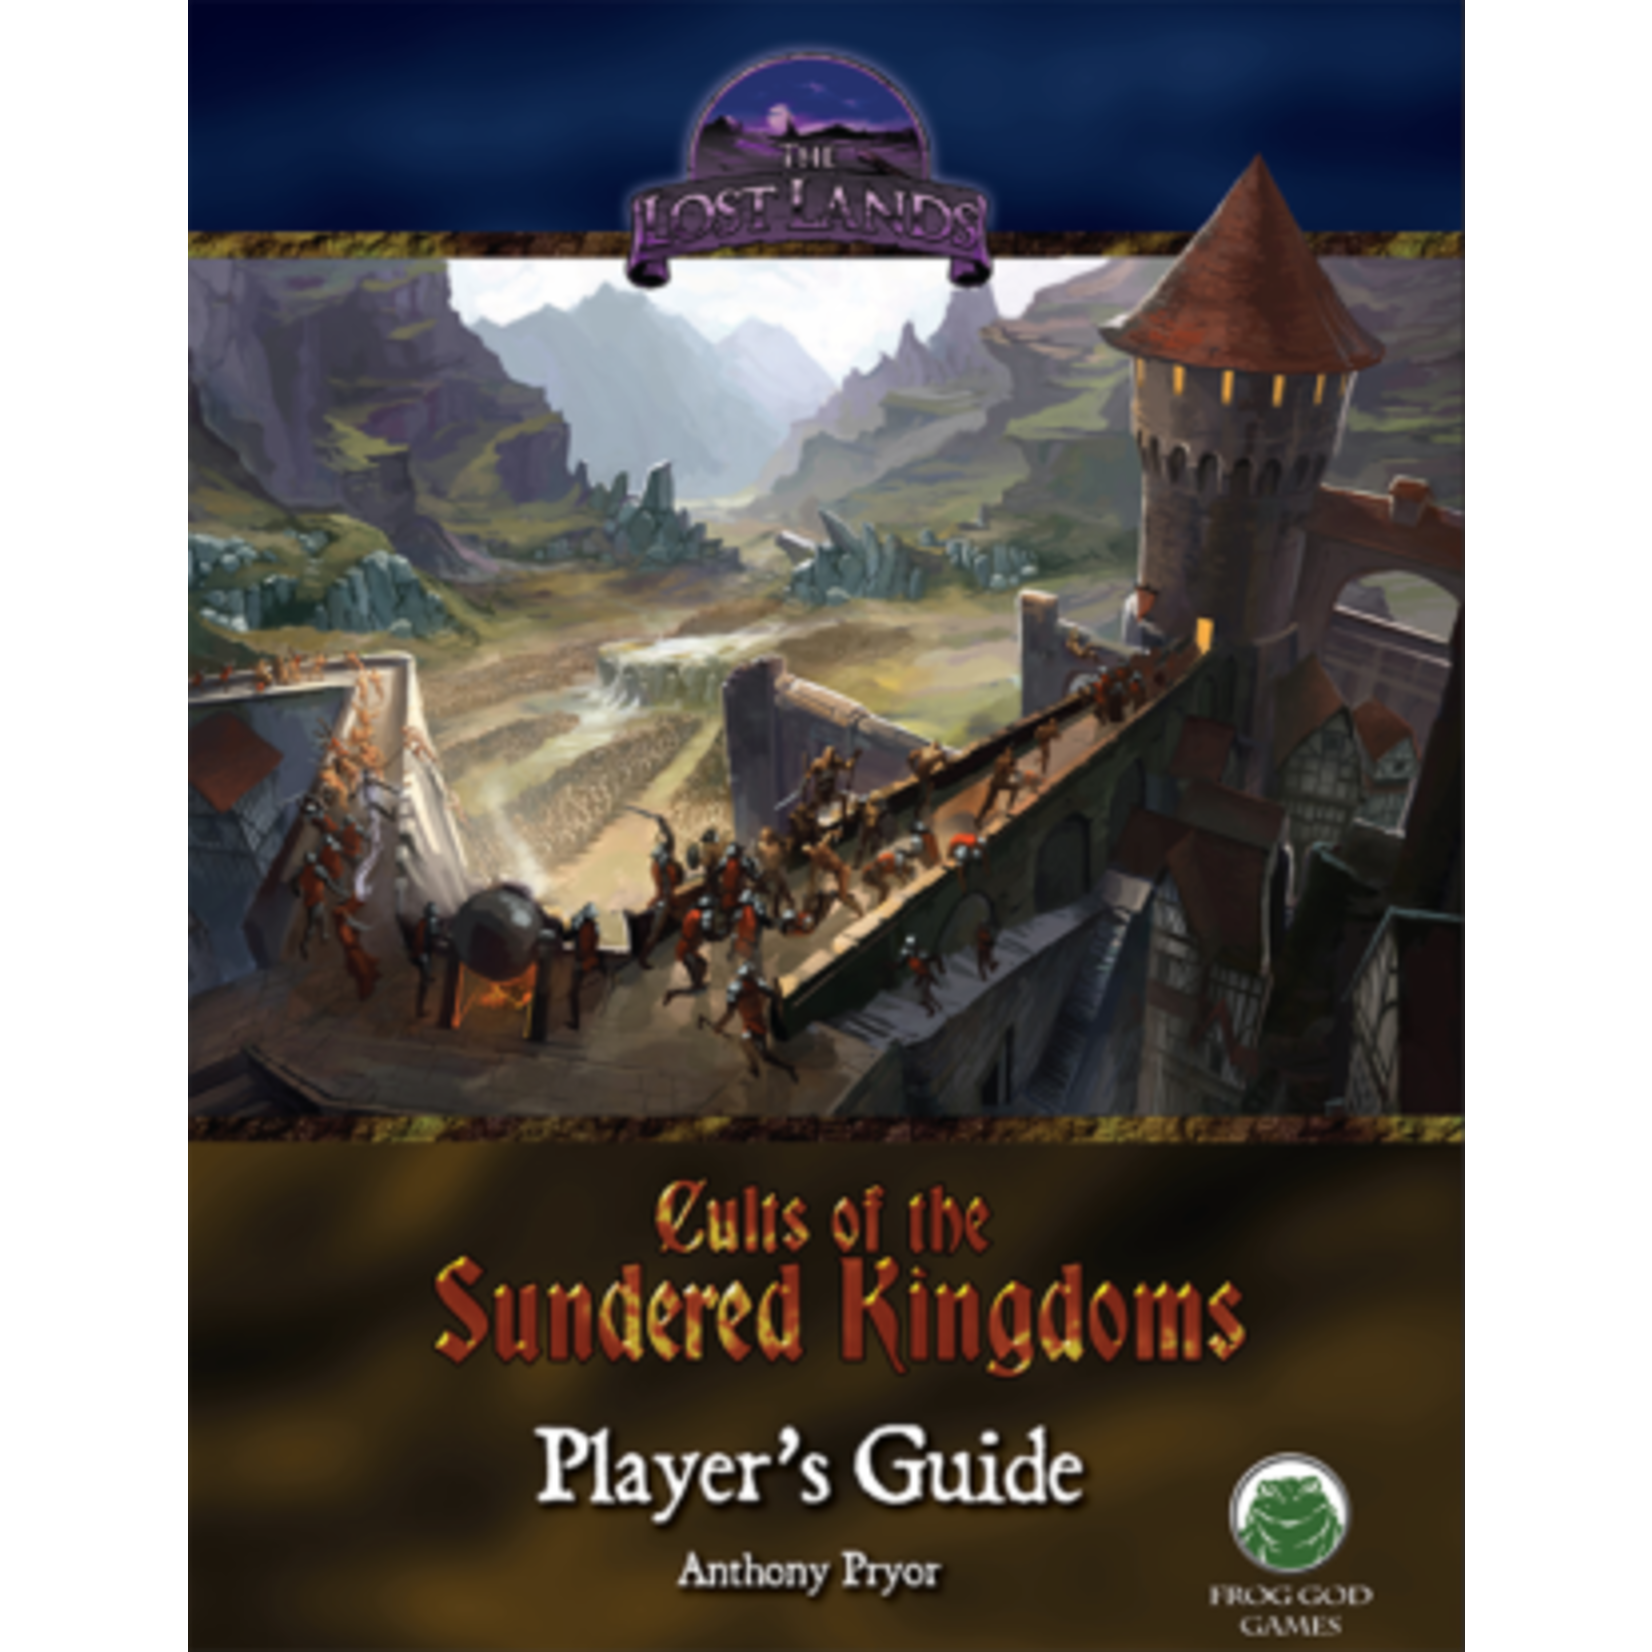 Frog God Games The Lost Lands: Cults of the Sundered Kingdoms Player's Guide